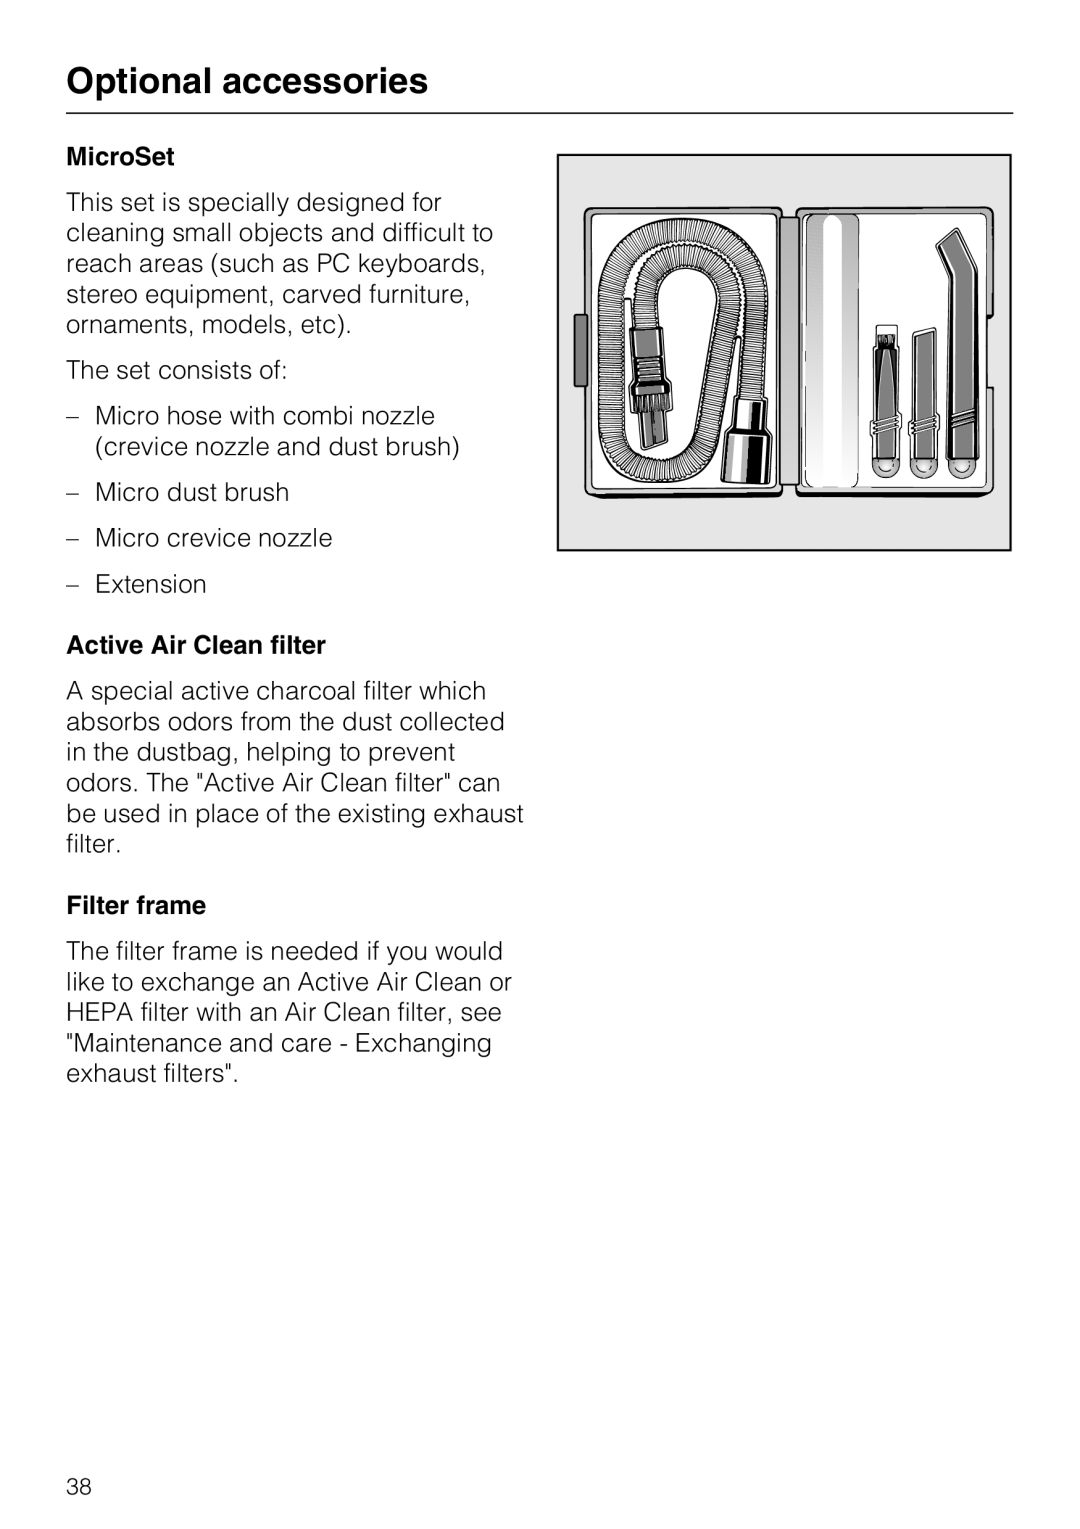 Miele S 5981 manual Optional accessories, MicroSet, Active Air Clean filter, Filter frame 